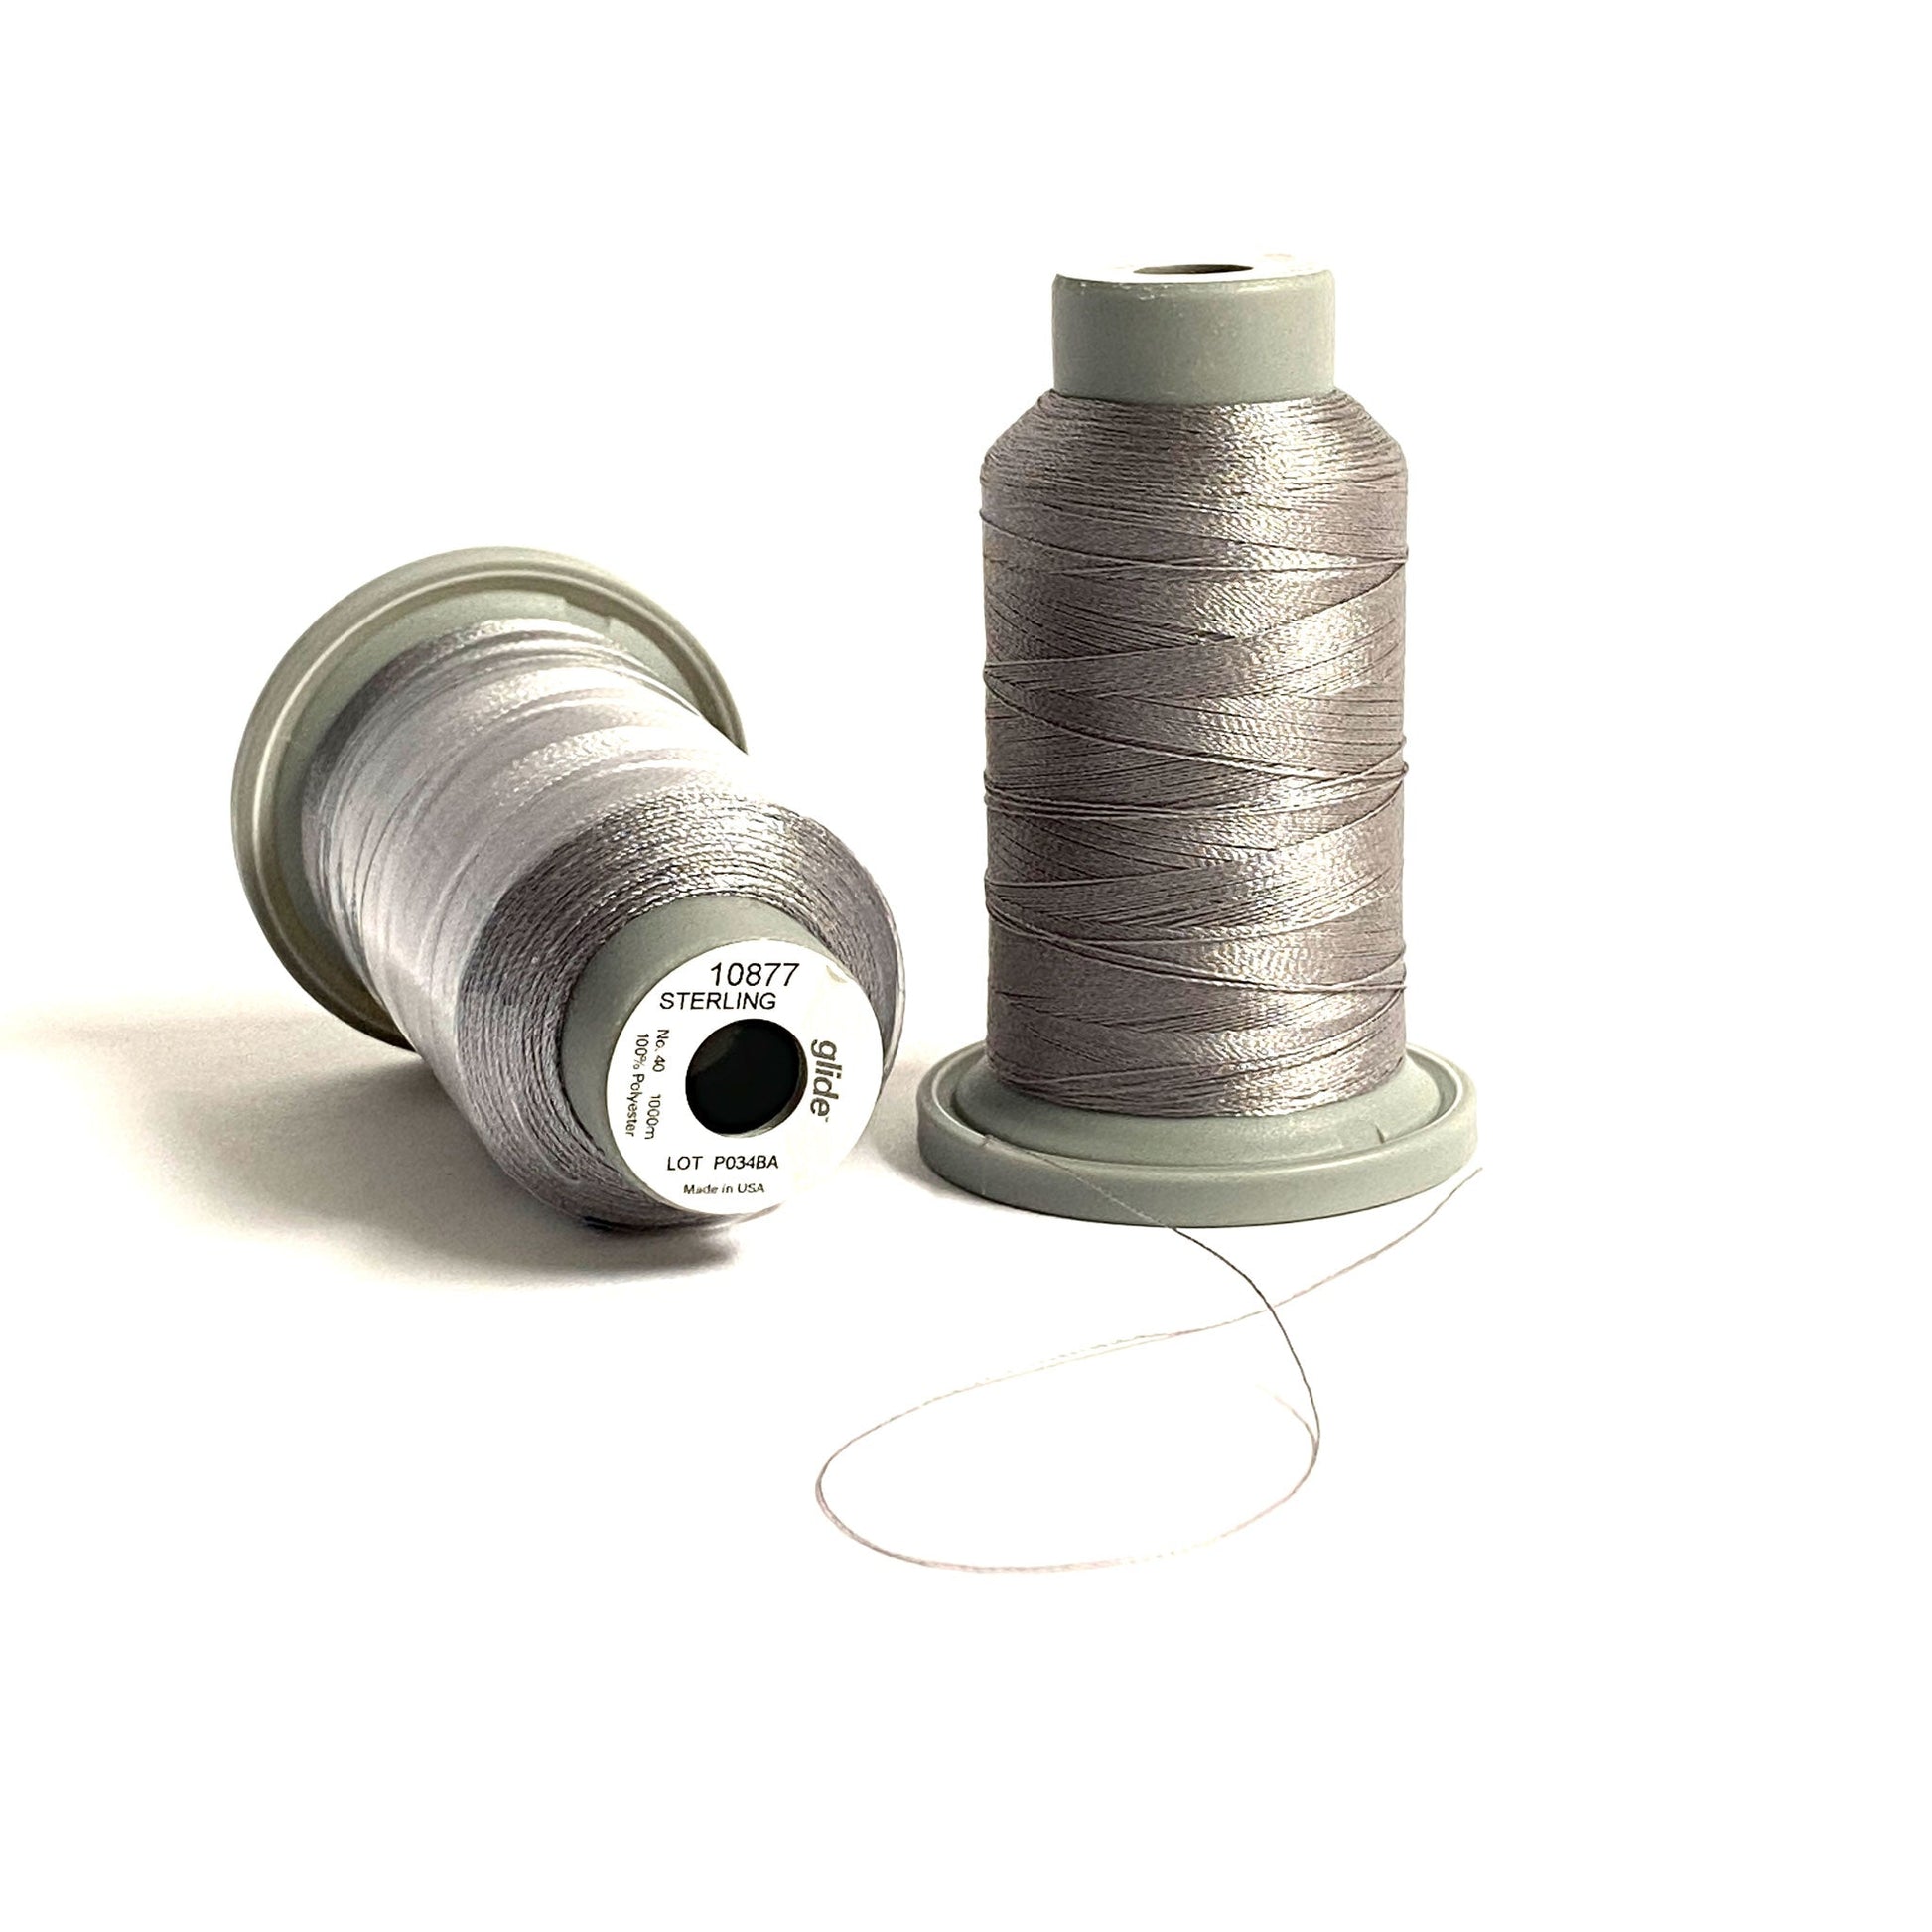 Glide 40 wt. Trilobal polyester thread by Fil-Tec is known for superior strength and coverage in each 1,100 yard mini spool. Sterling (10877) is a medium gray with a tinge of brown to give any project a weathered or aged look. Stitcher's Joy